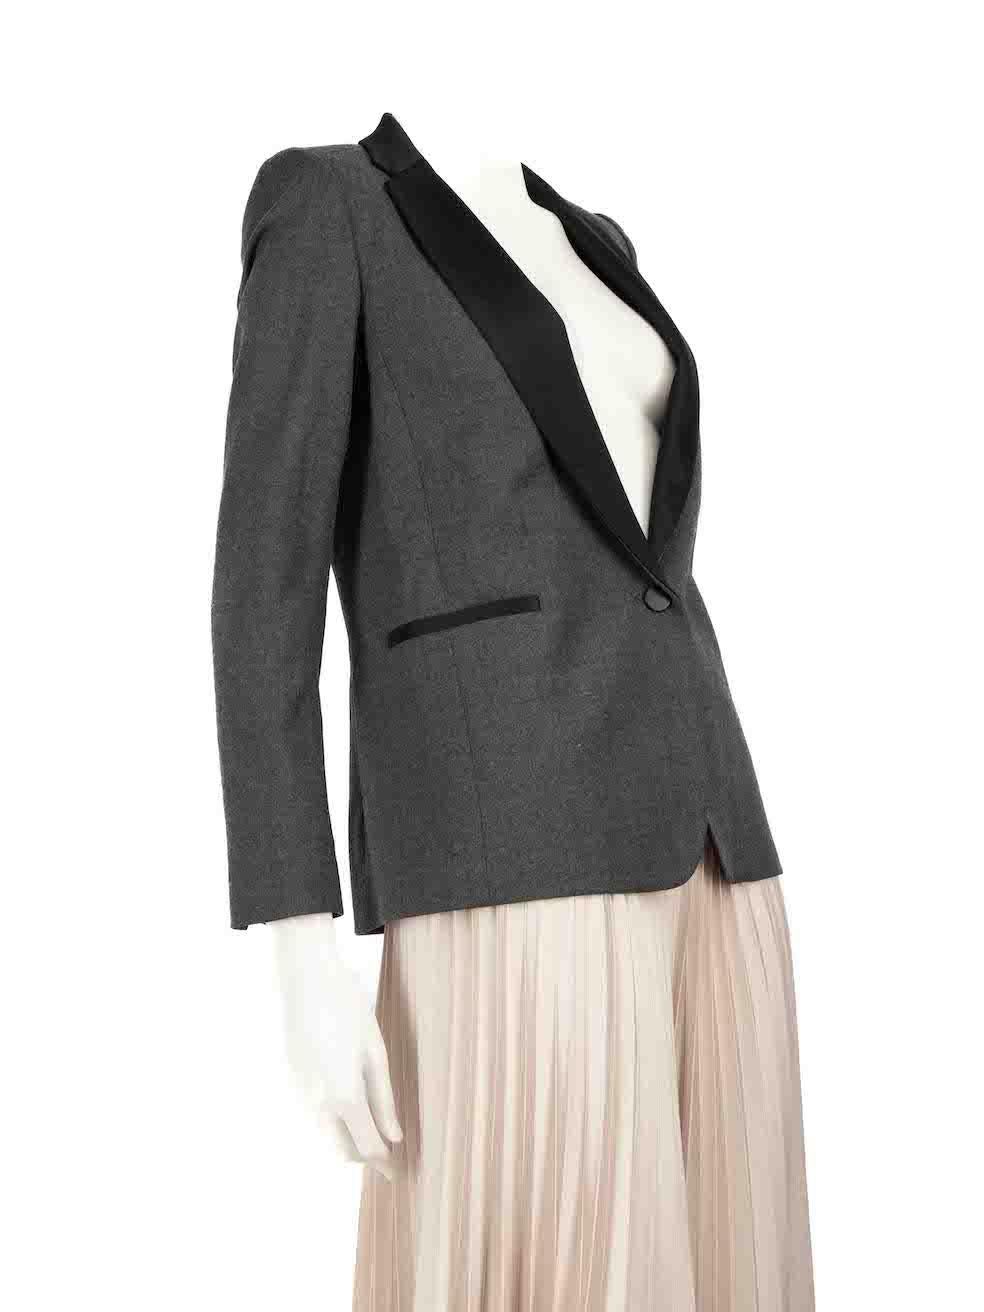 CONDITION is Very good. Hardly any visible wear to the blazer is evident on this used Sandro designer resale item.
 
 
 
 Details
 
 
 Grey
 
 Wool
 
 Blazer
 
 Contrast black lapel
 
 Shoulder pads
 
 Button up fastening
 
 Single breasted
 
 Long